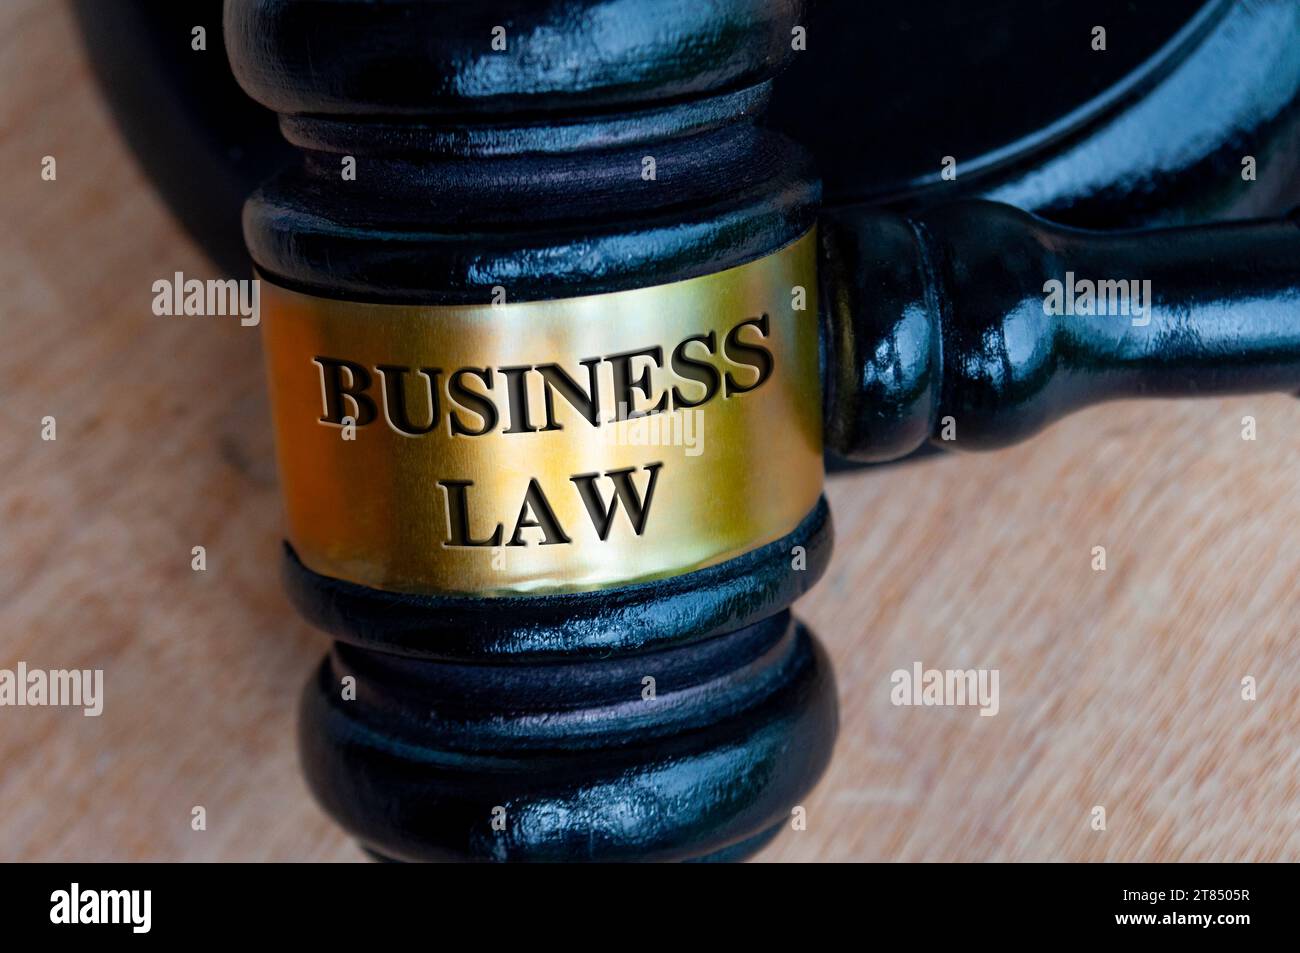 Business law text engraved on gavel. Business law and legal concept Stock Photo